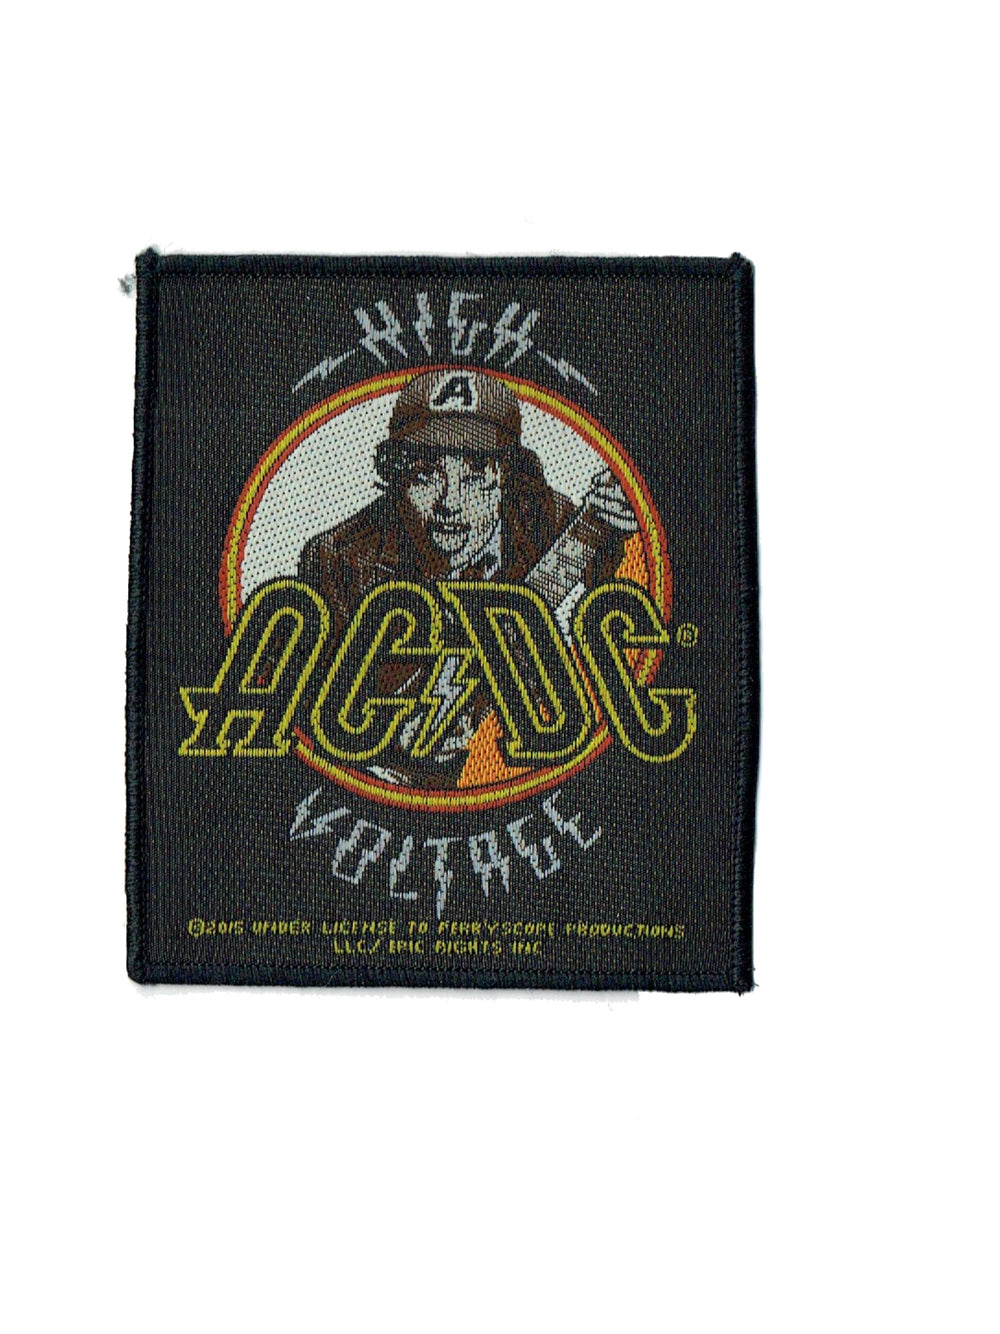 AC/DC High Voltage Official Woven Patch Brand New